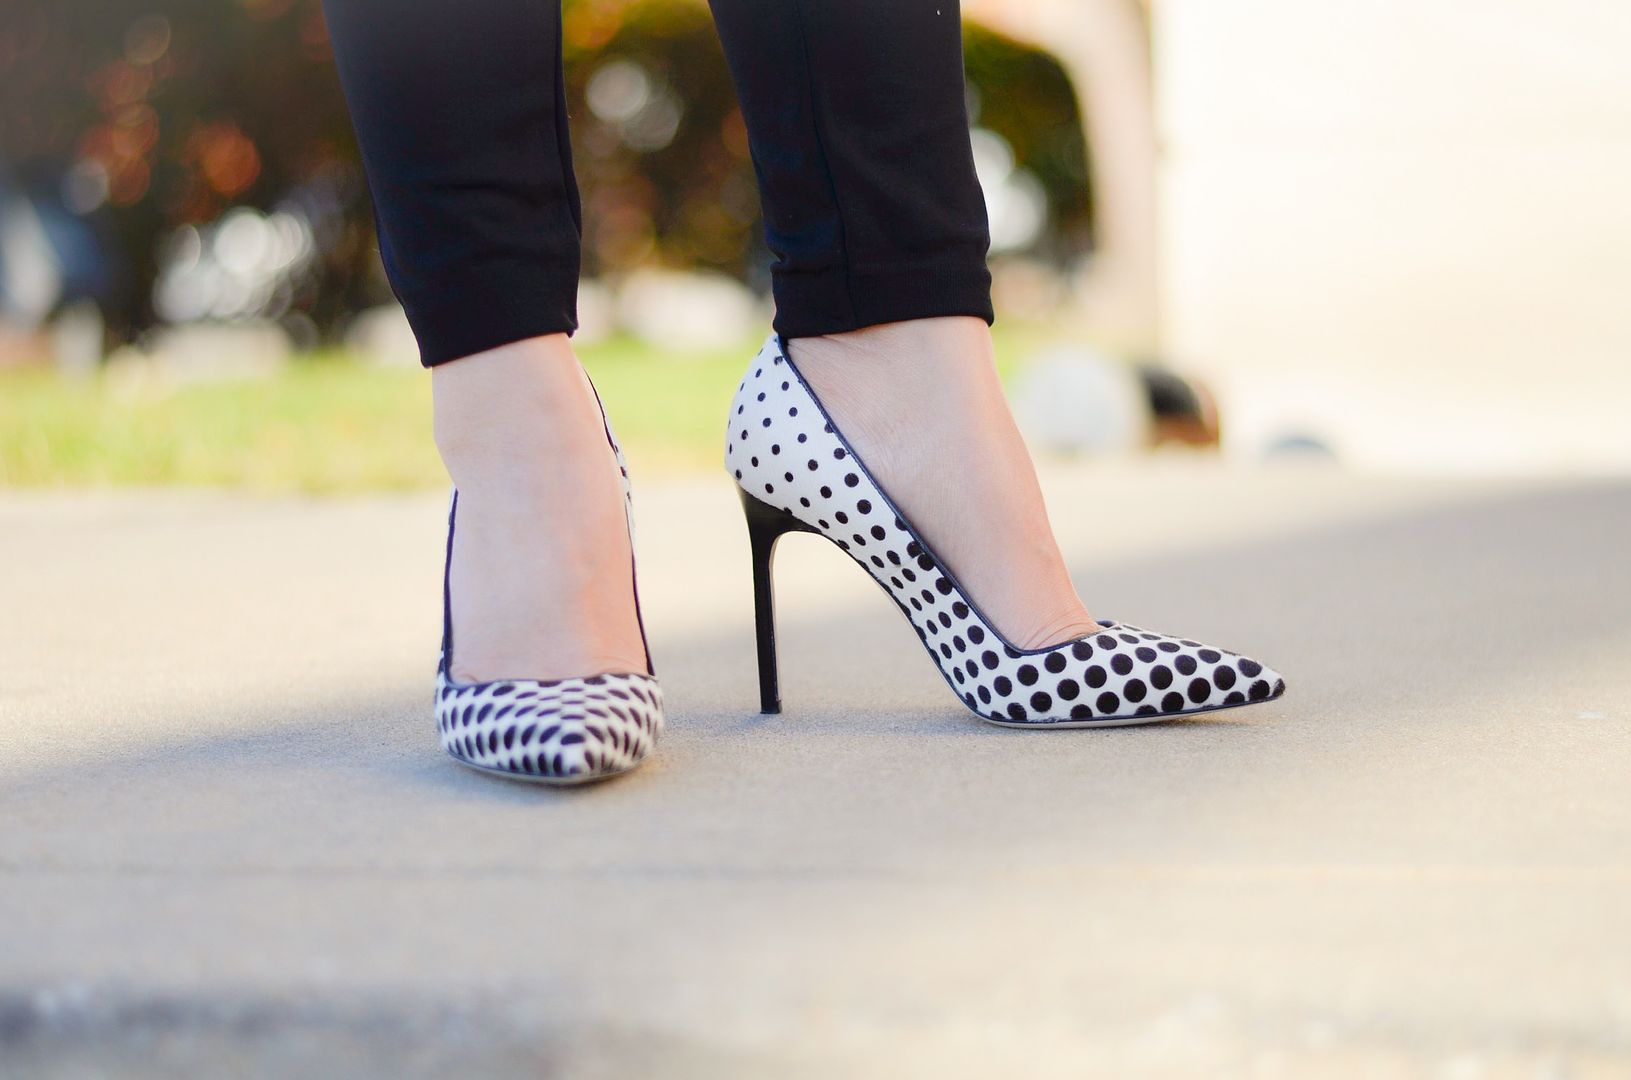 Manolo BB pumps in dot print